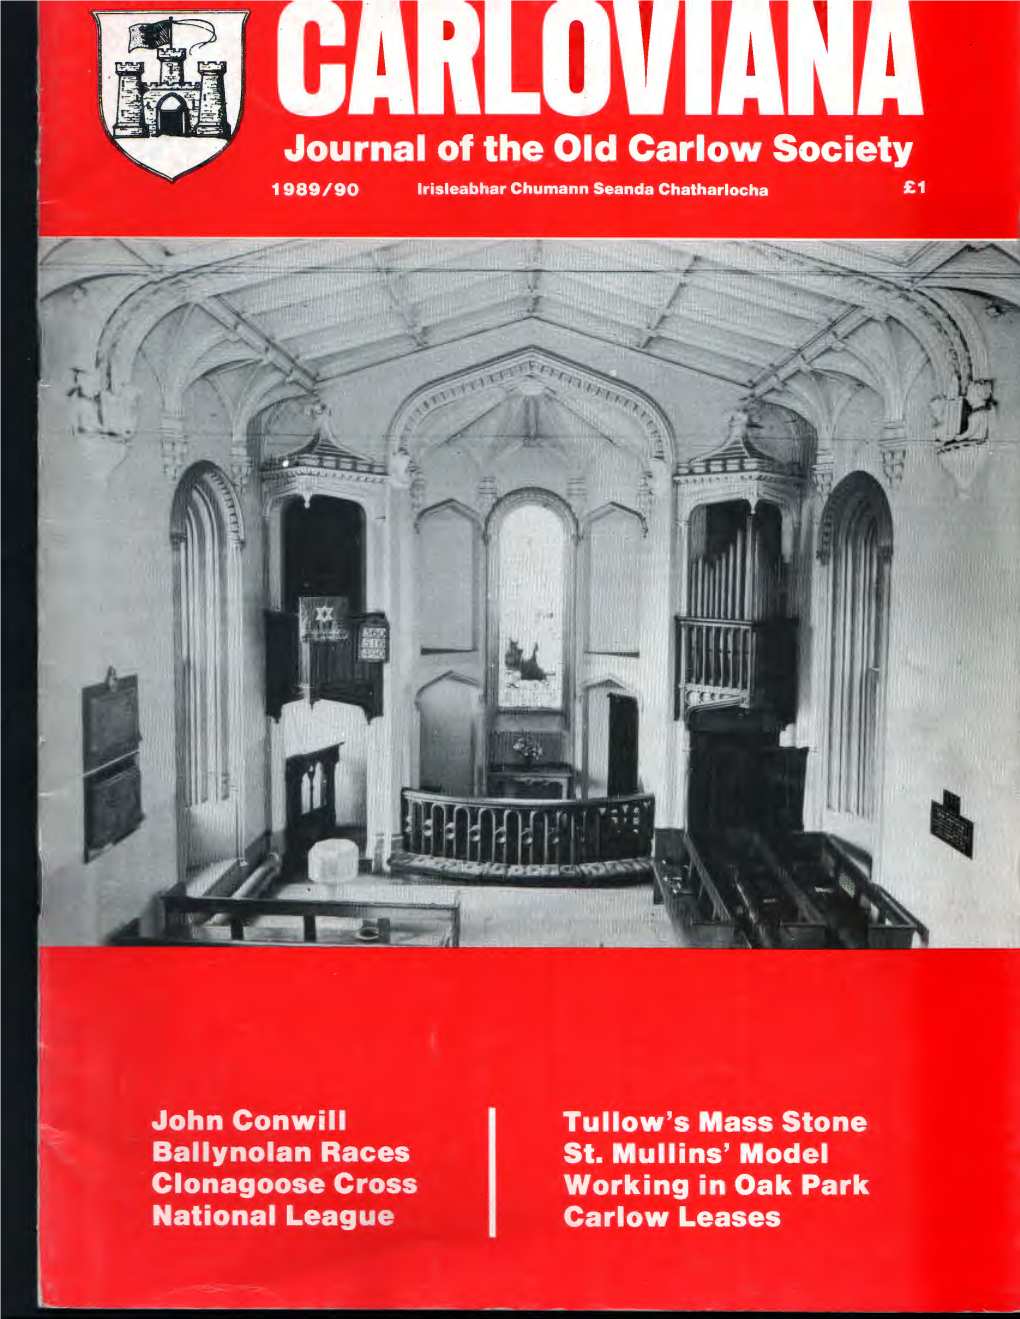 Railways and County Carlow Compiled by William Ellis